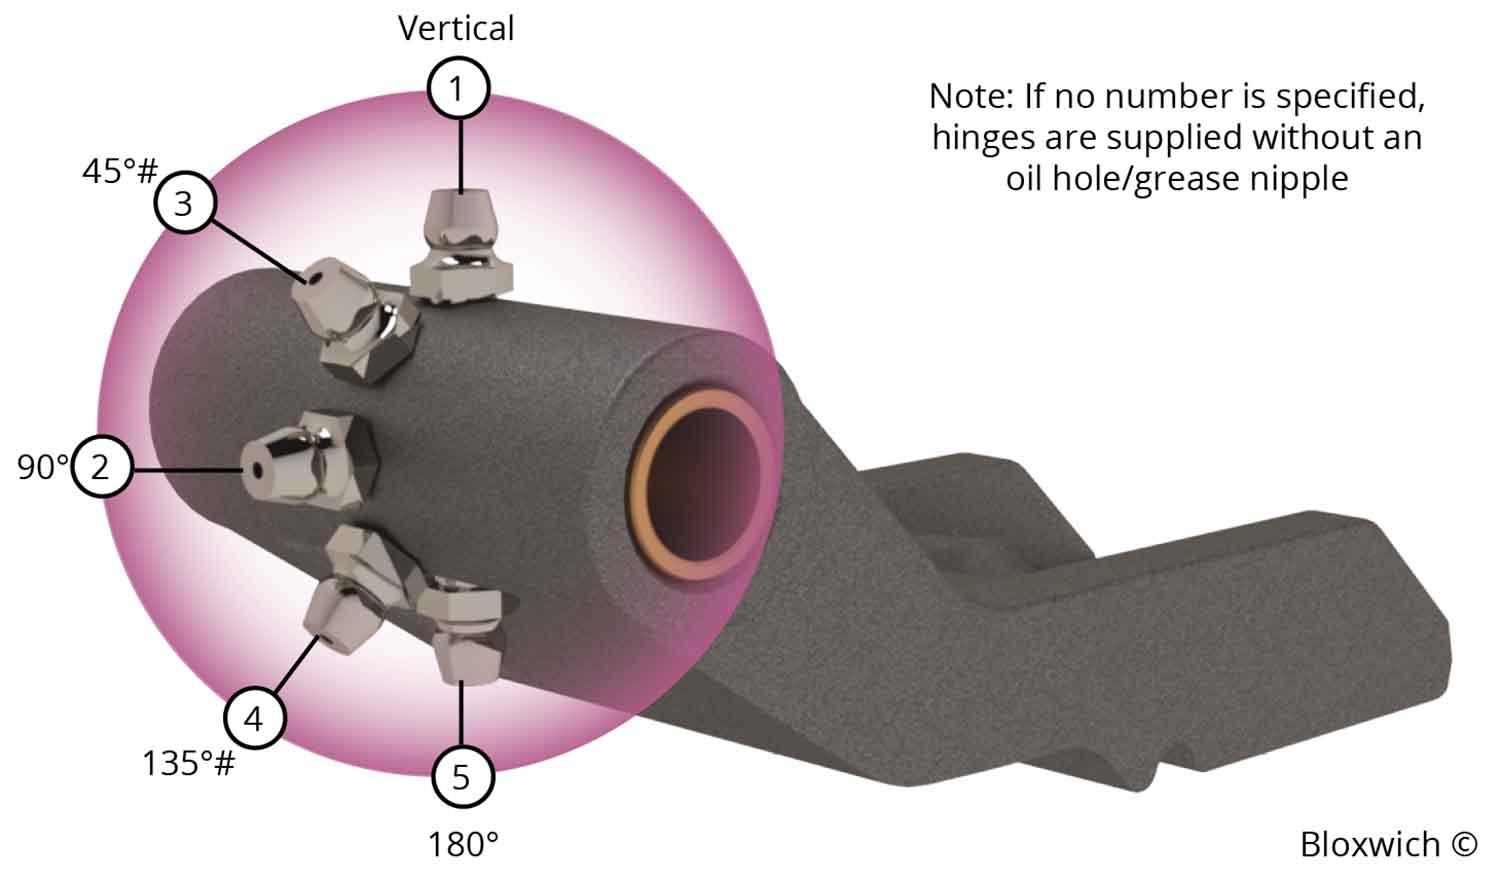 Standard Forged Hinge Oil Hole/Grease Nipple Positions